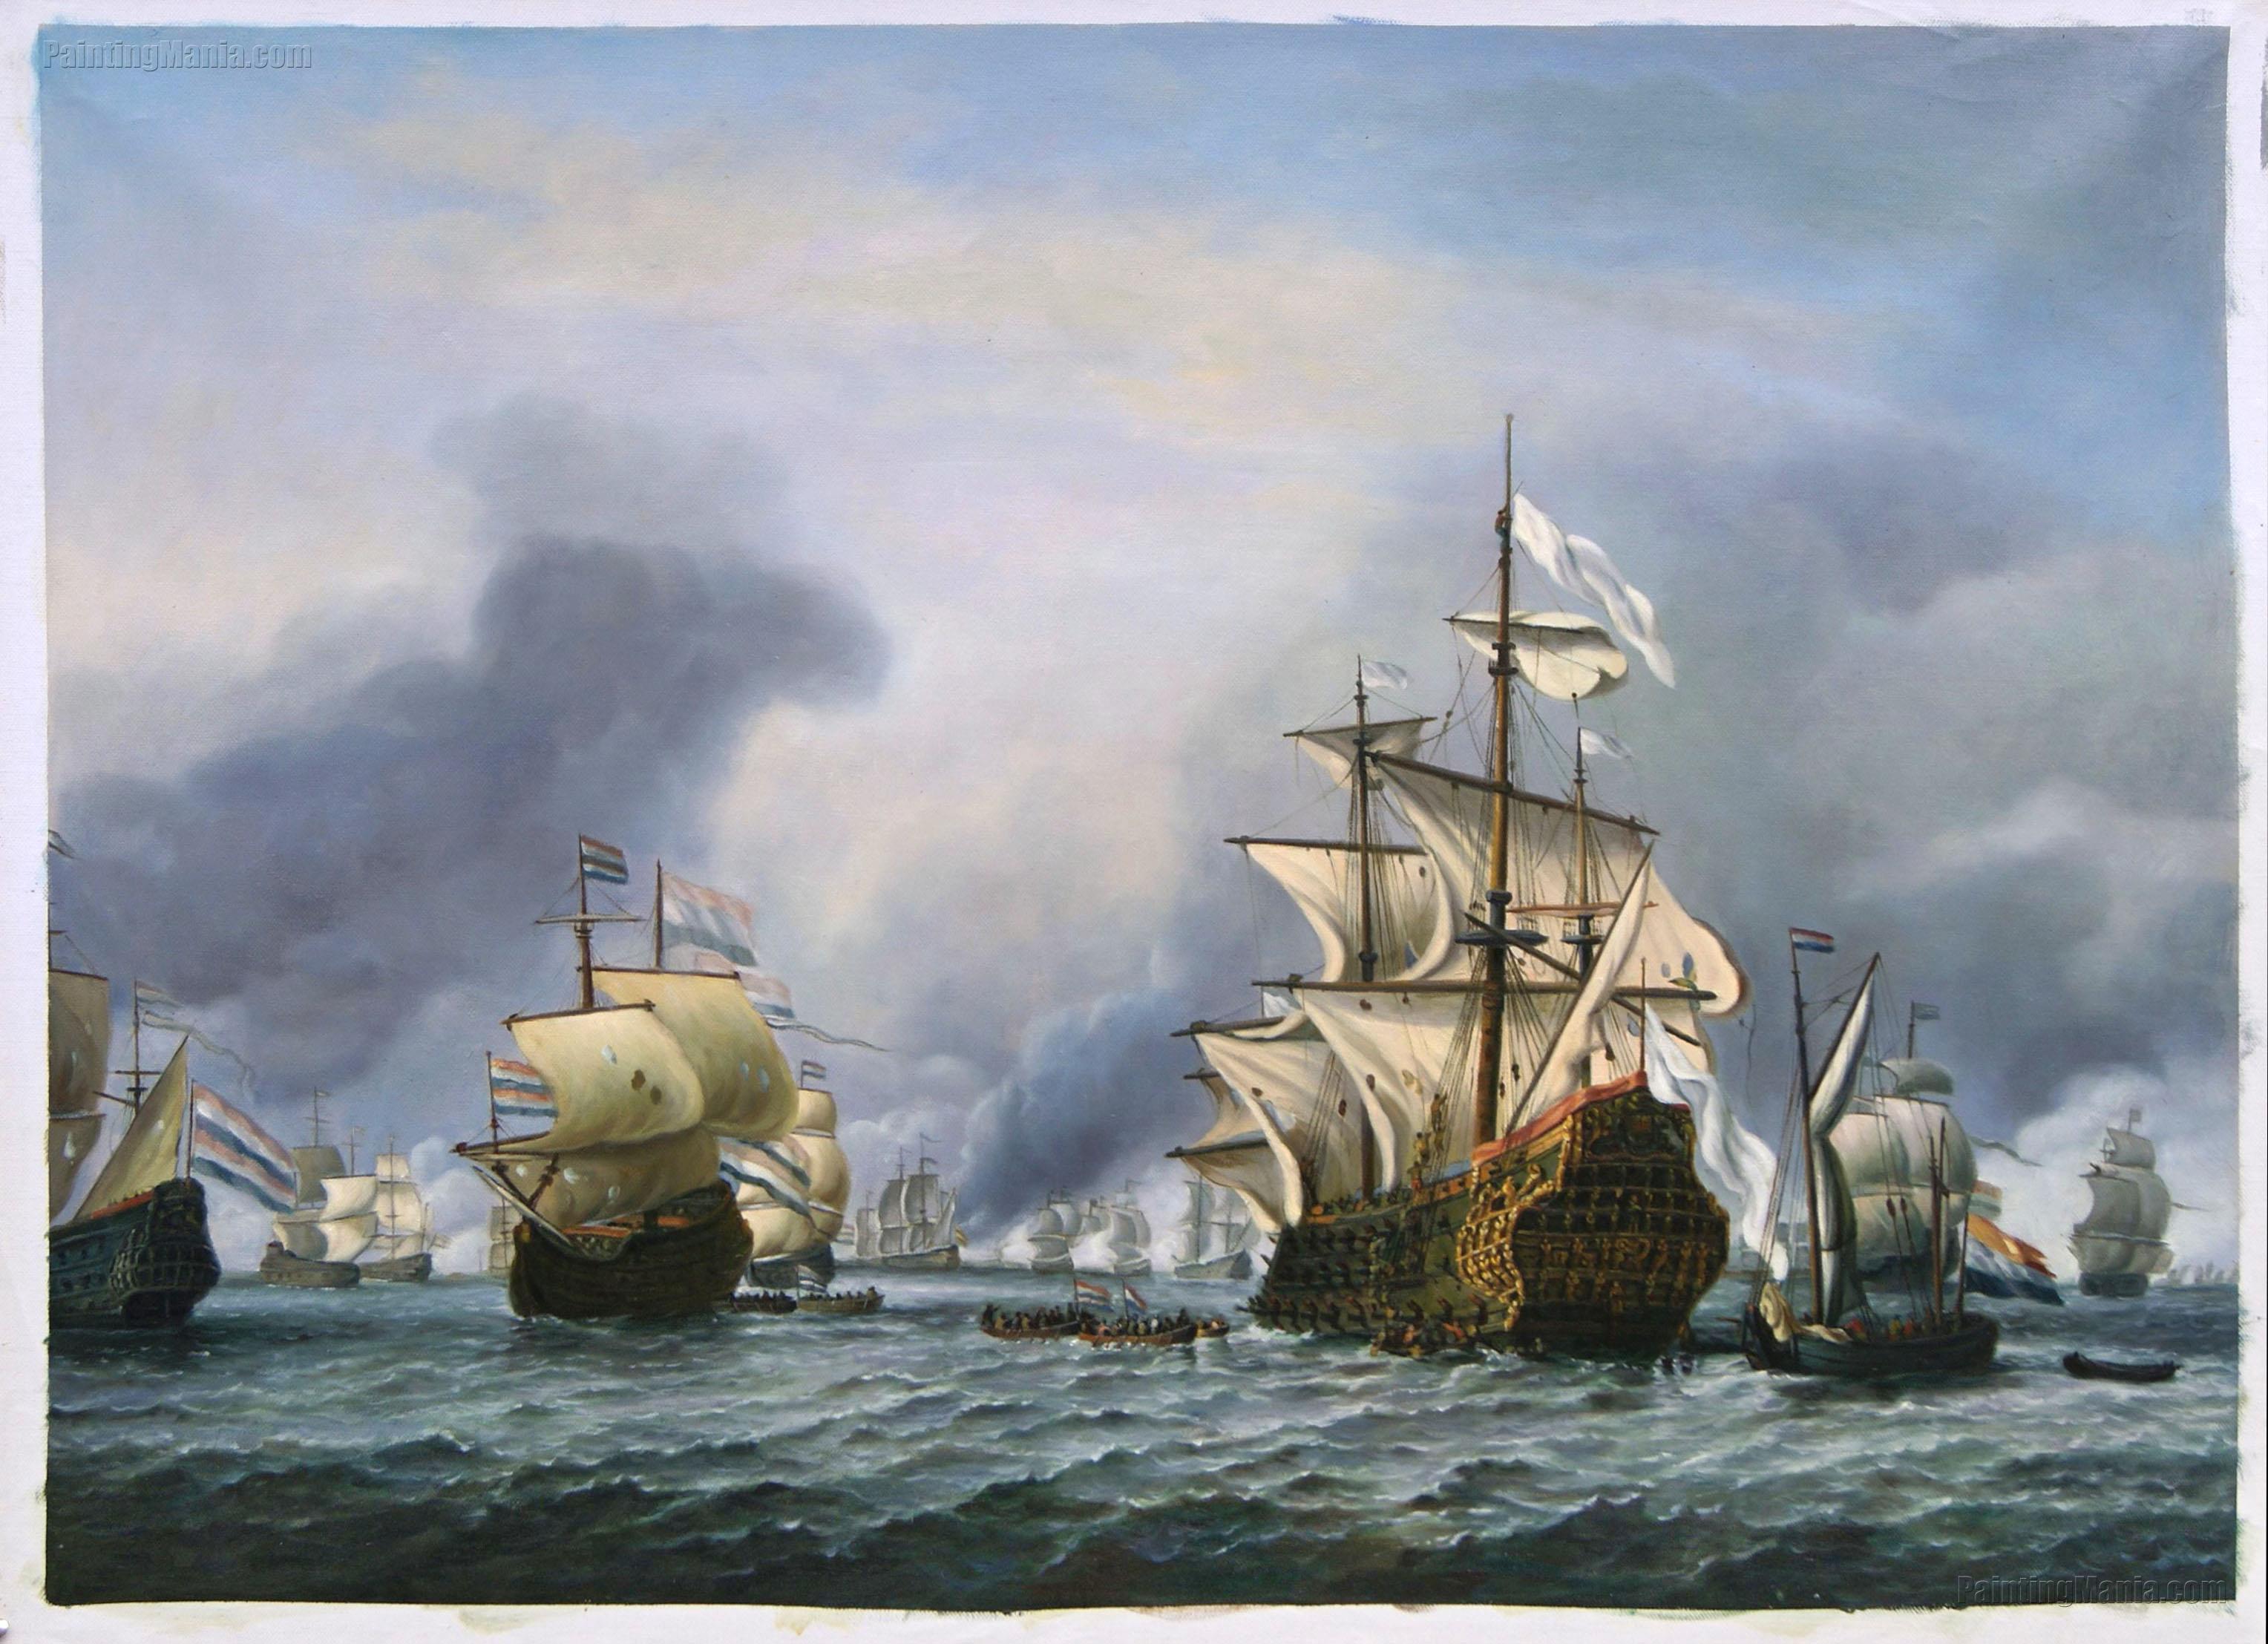 The Capture of the Royal Prince, 13 June 1666